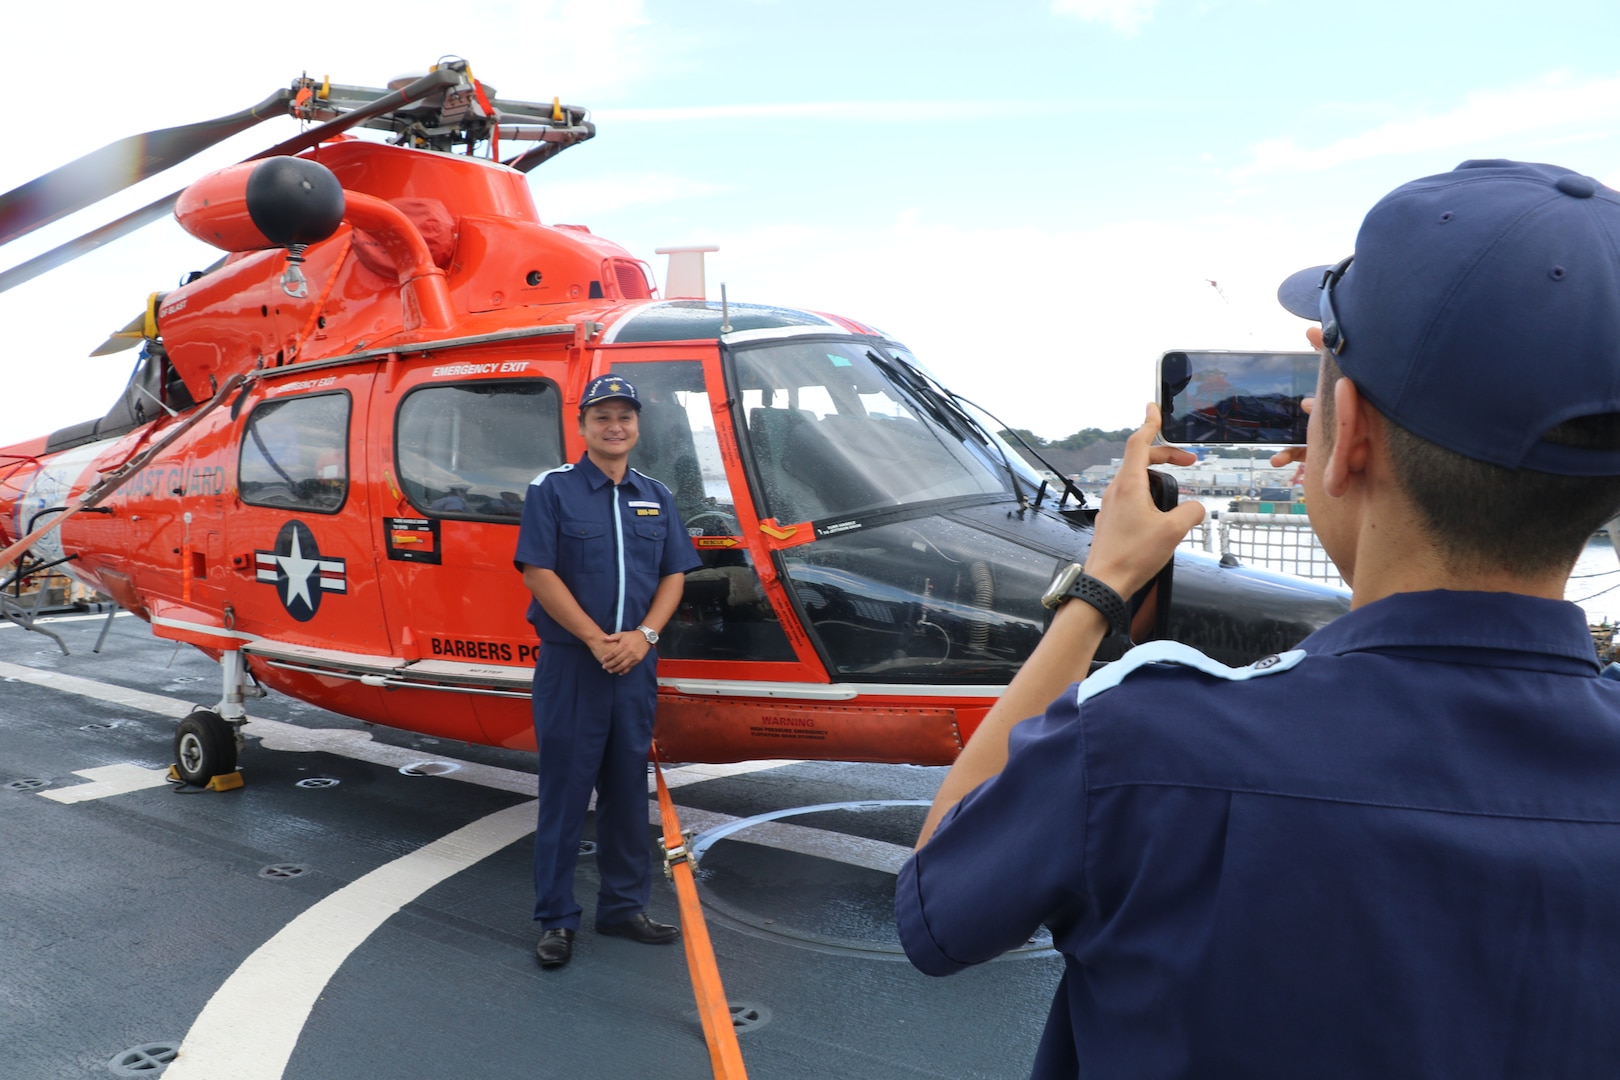 Capt. Tetsuhiro Nakagawa, the Director for International Strategy for the Japan Coast Guard, poses for a photo with a Coast Guard MH-65 Dolphin helicopter after touring the Coast Guard Cutter Munro (WMSL 75) during the cutter’s port call to Yokosuka, Japan, Aug. 8, 2023. Yokosuka was Munro’s first international port call during their months-long deployment to the Indo-Pacific region. (U.S. Coast Guard photo)